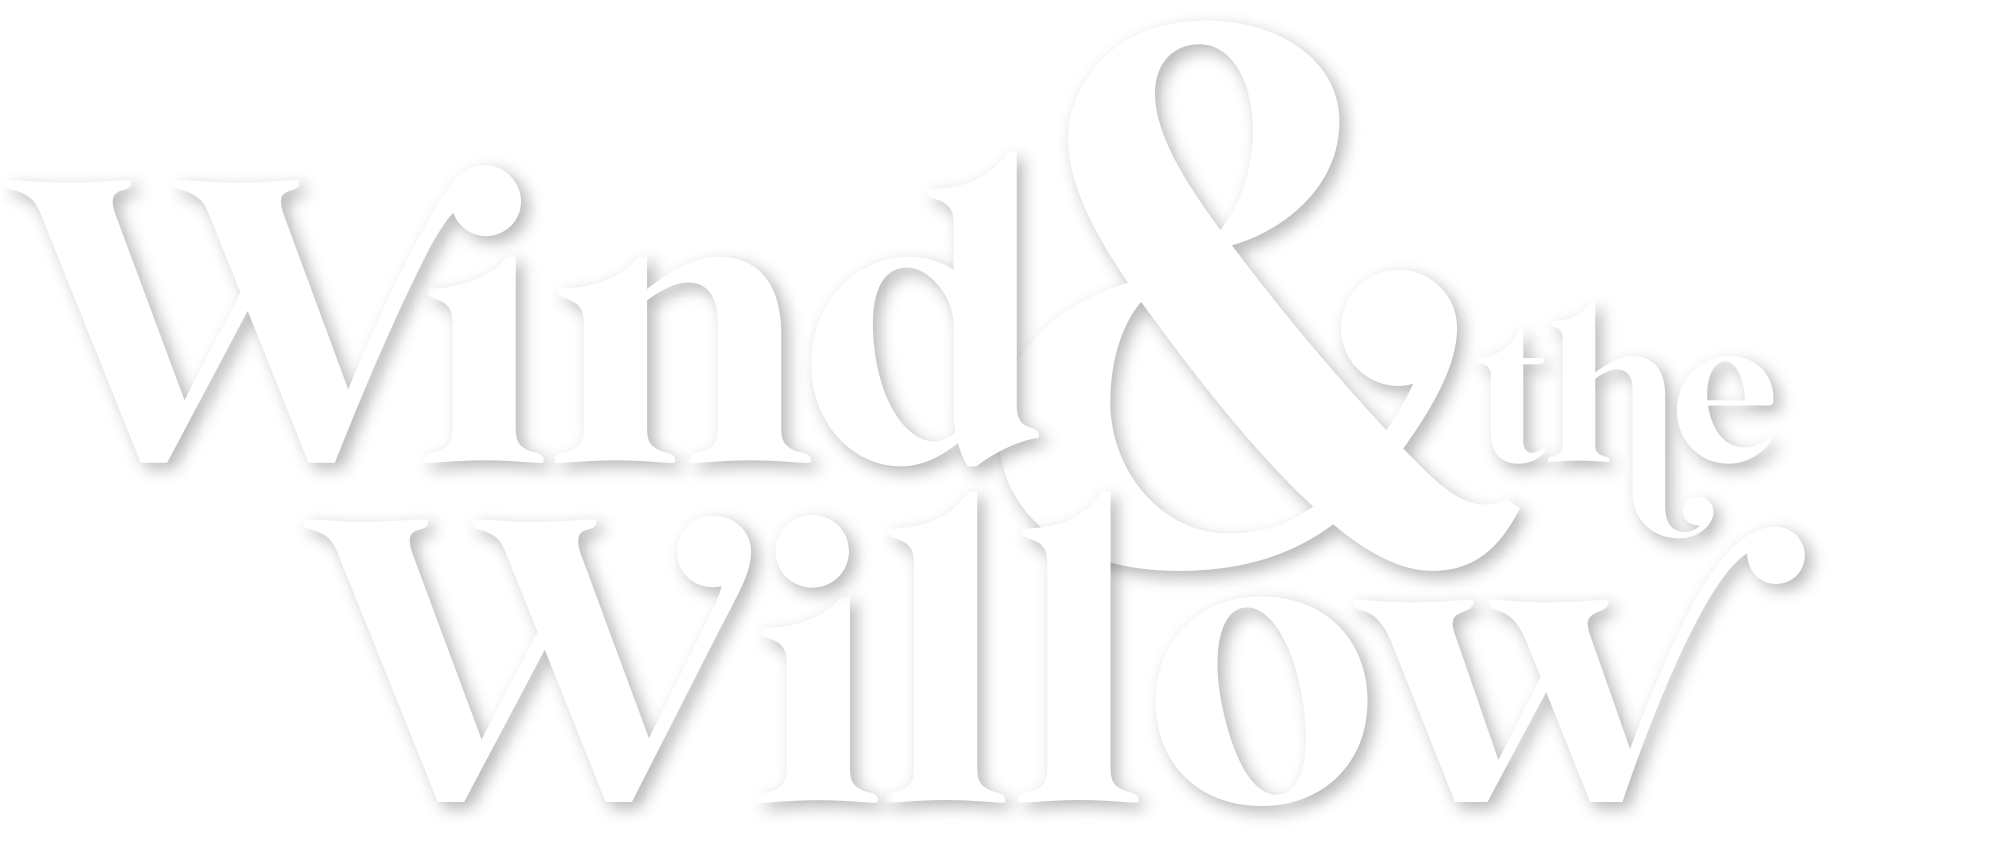 The reversed (all white) version of the Wind and the Willow logo.